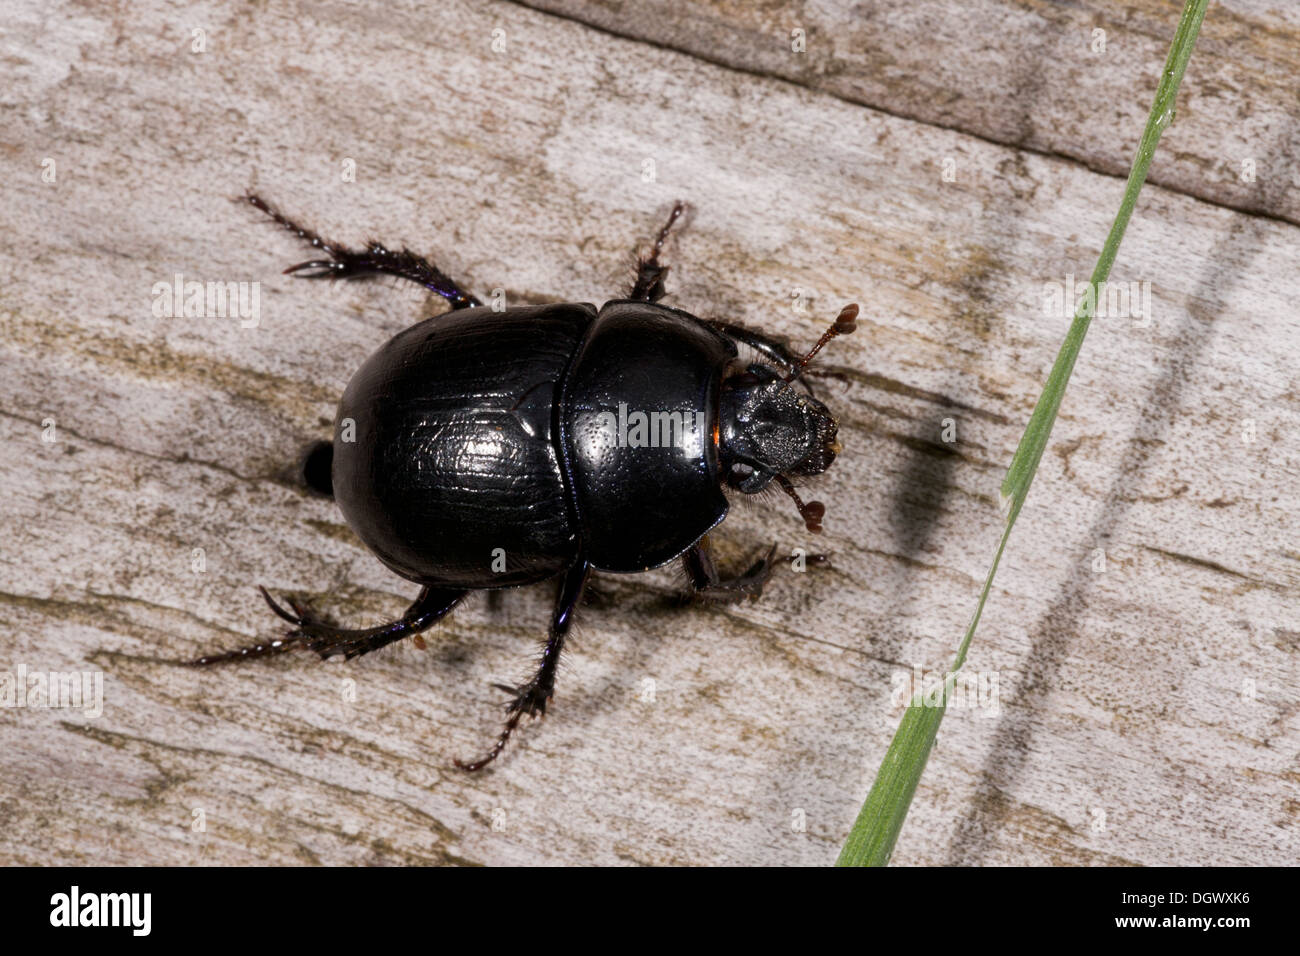 A Dor Beetle, or Dung Beetle, Anoplotrupes stercorosus = Geotrupes; breeds on dung. Stock Photo